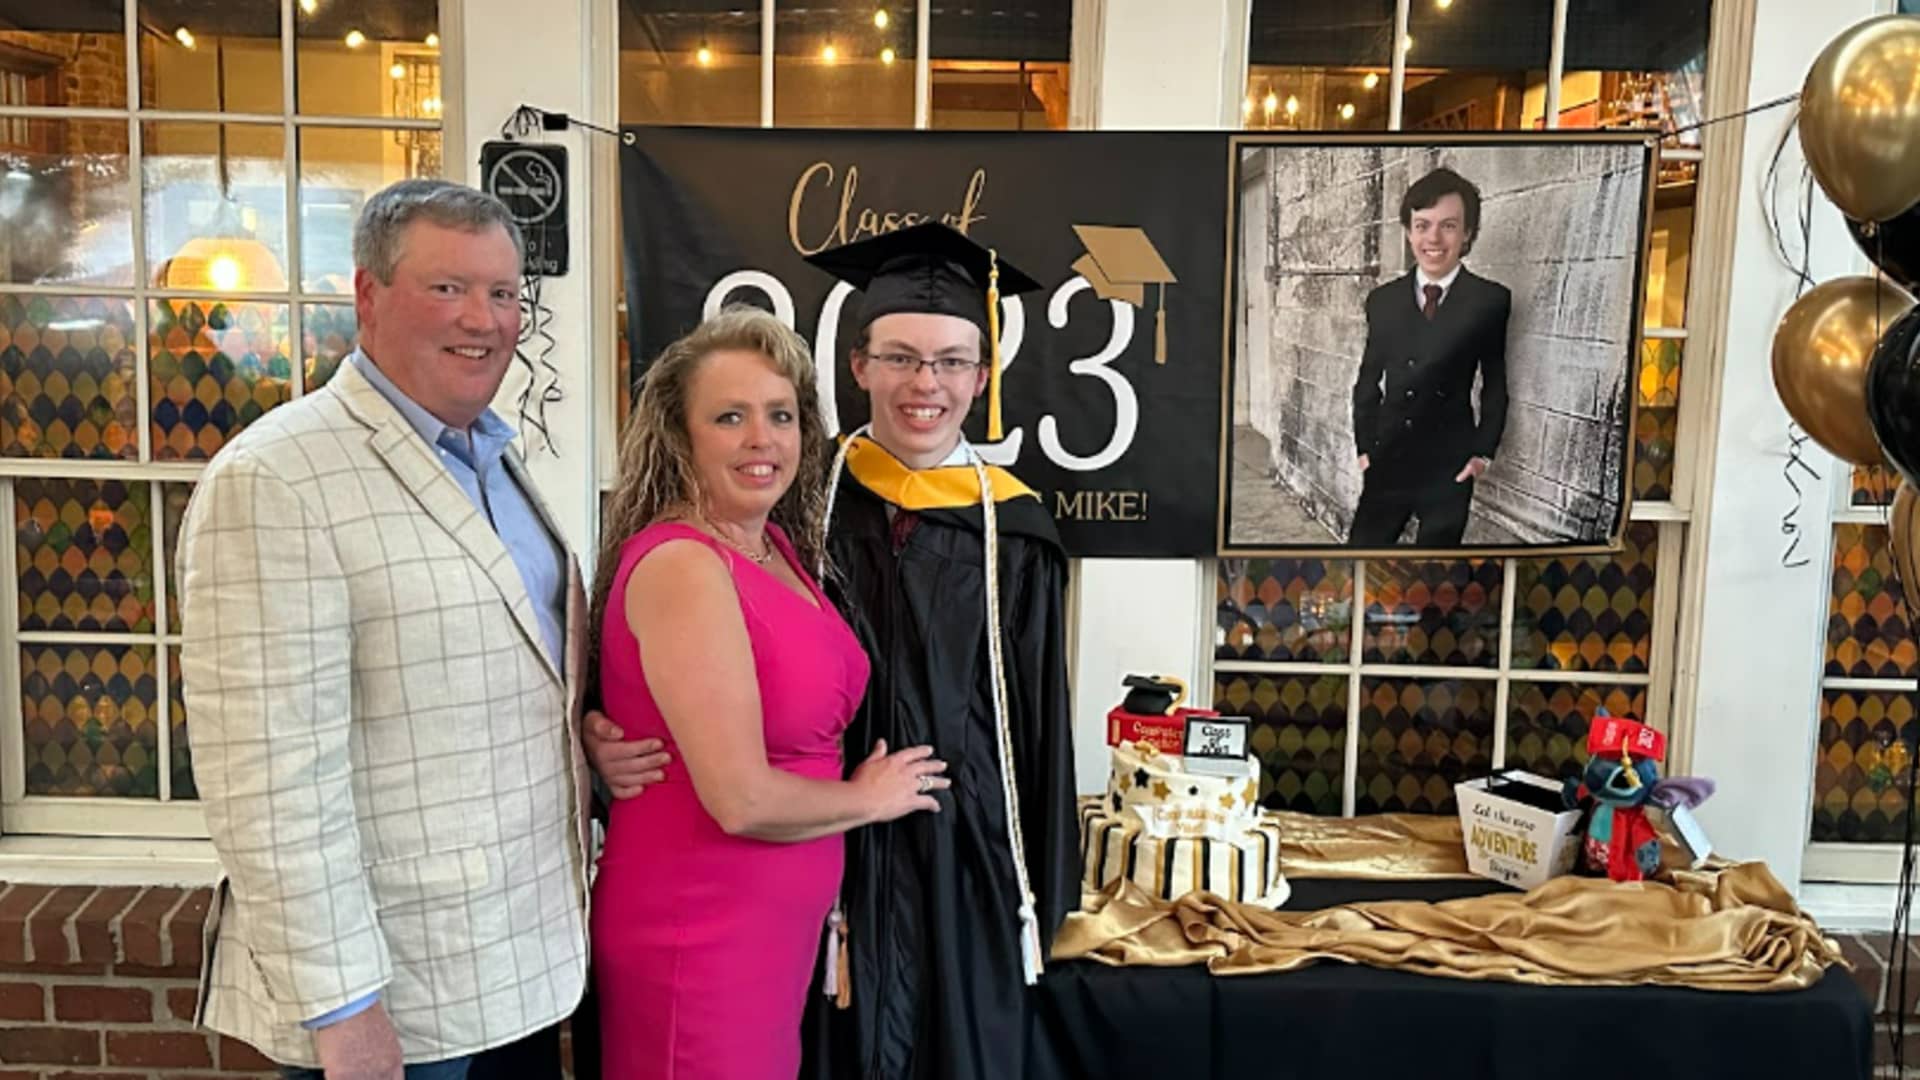 Mom and Dad of 14-year-old college graduate share their No. 1 parenting rule: We 'left no room for negotiating on his social skills'